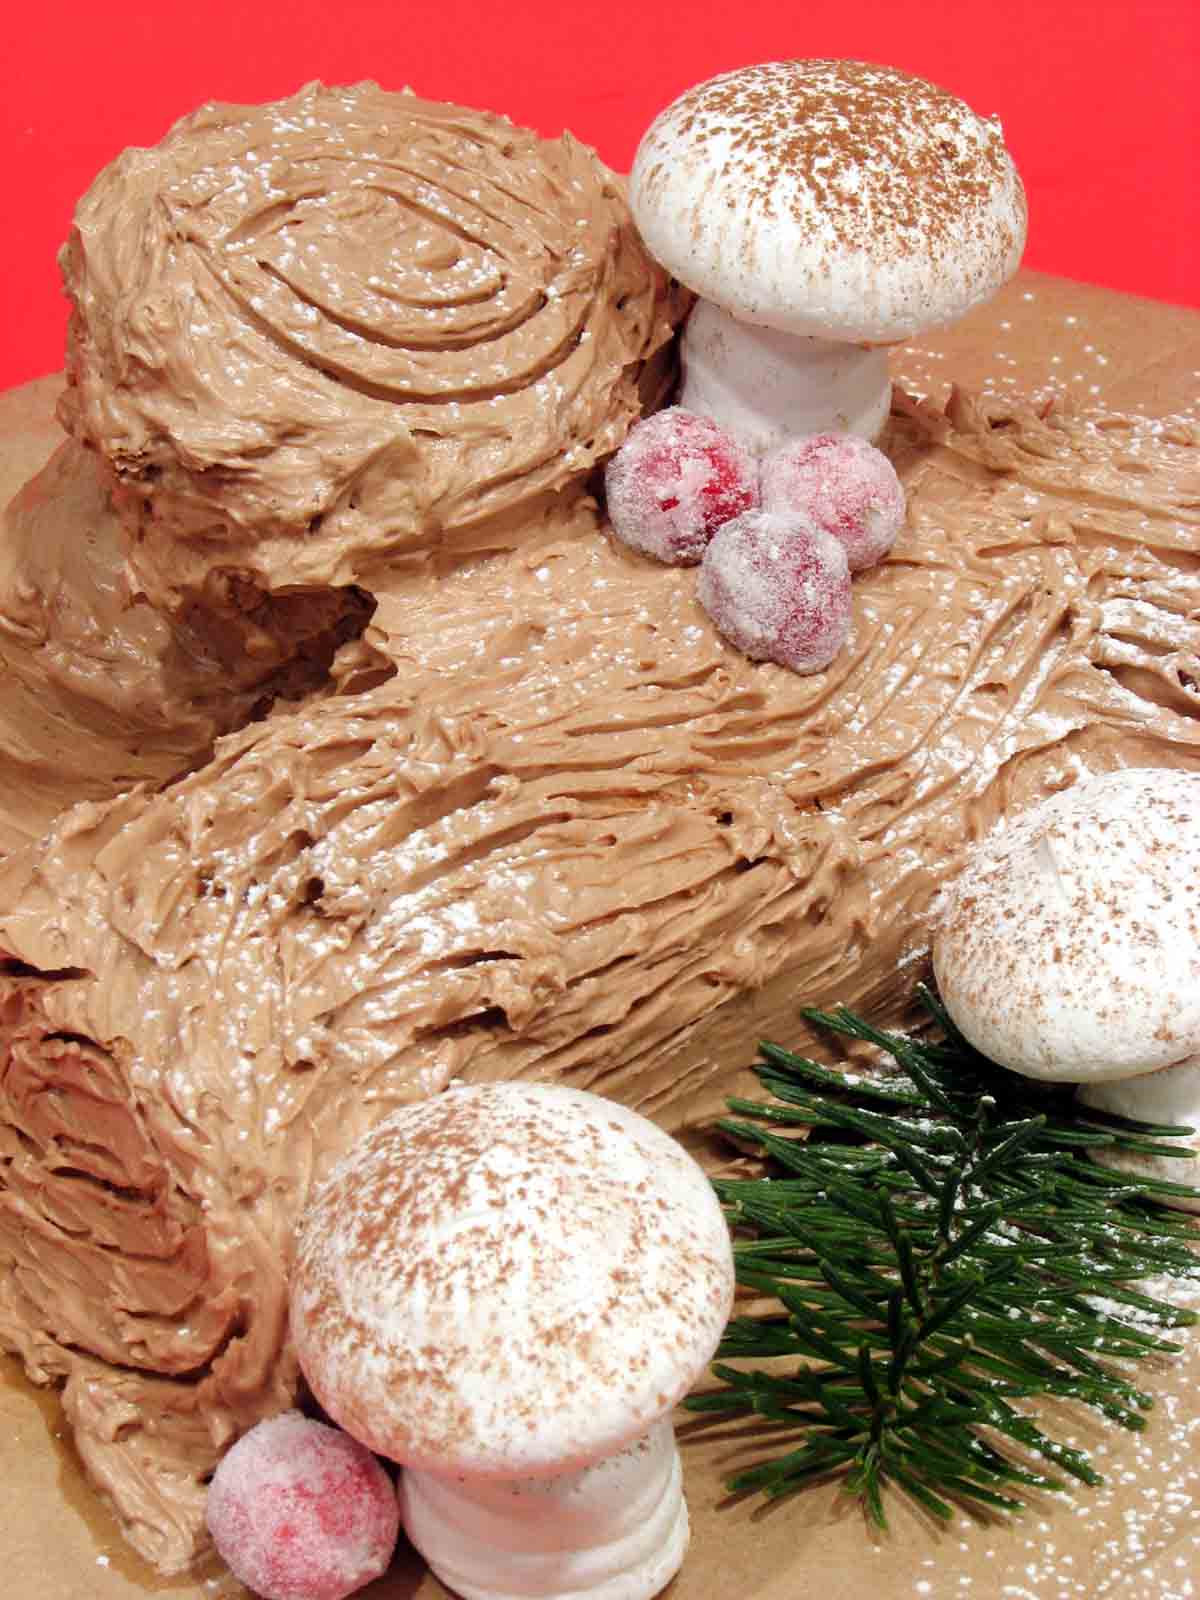 Chocolate Yule Log Cake topped with meringue mushrooms and sugared berries